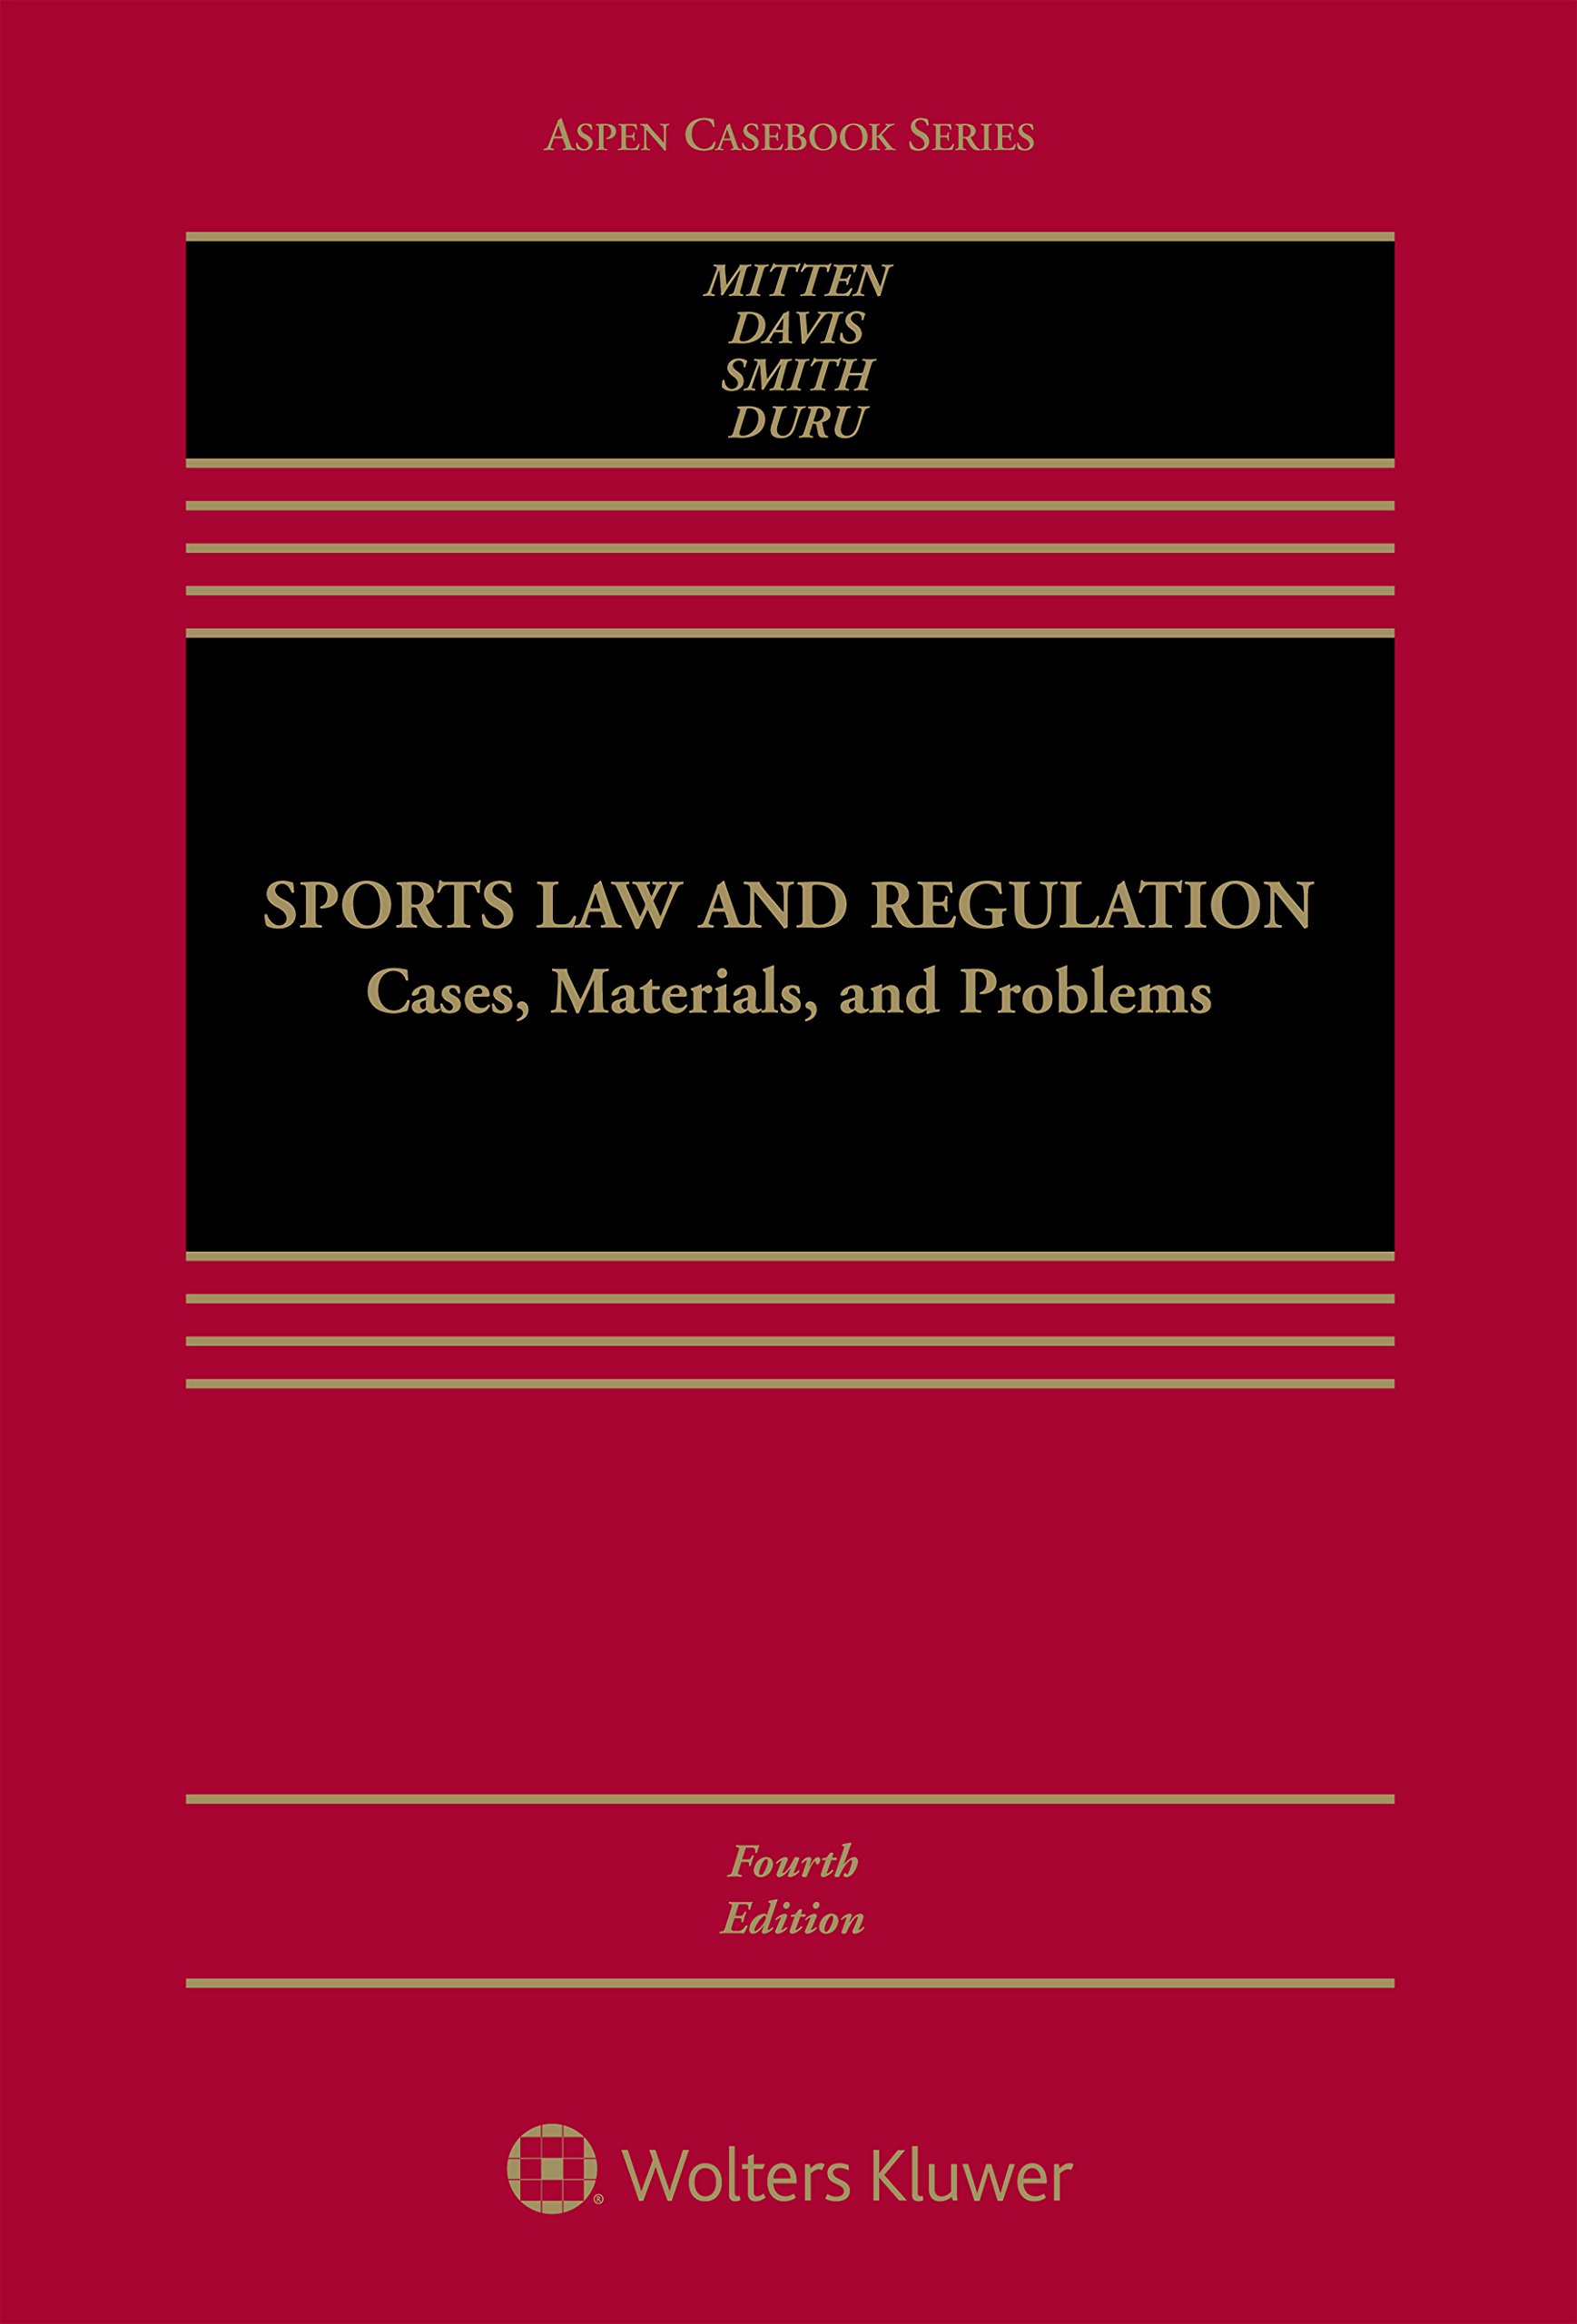 Sports Law and Regulation: Cases, Materials, and Problems (Aspen Casebook)